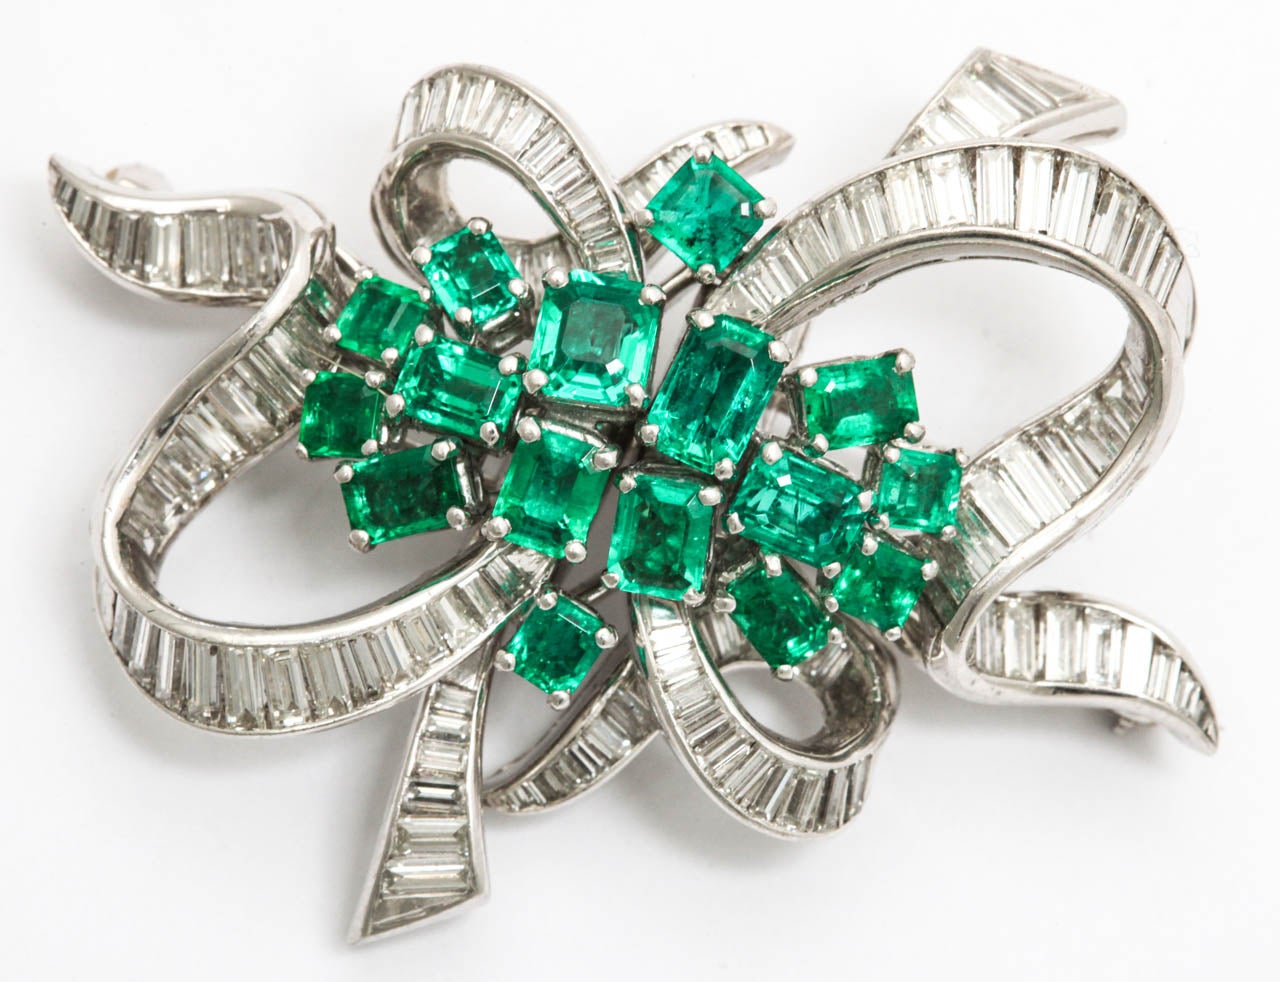 Fluid Ribbon Brooch - separating to a pair of Duet Clips with hand made fitted attachment.  Early 50's and so much of the period.
7.0 cts of Diamond Baguettes - G-H color - VS clarity &  3.5 cts of brilliant Columbian Emeralds set in a handmade